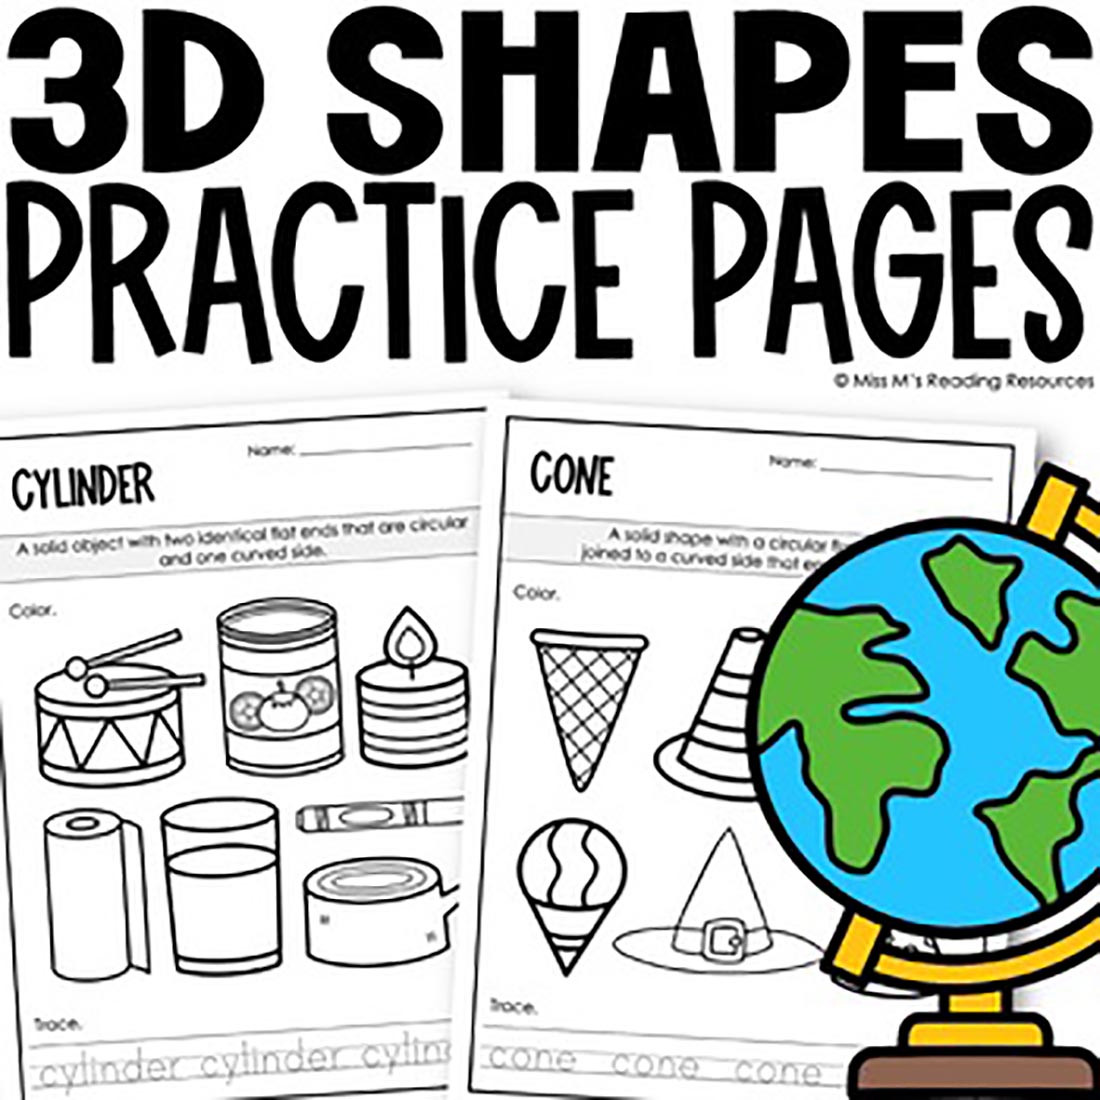 3D Shape Worksheets Kindergarten Math from Miss M's Reading Resources preview image.